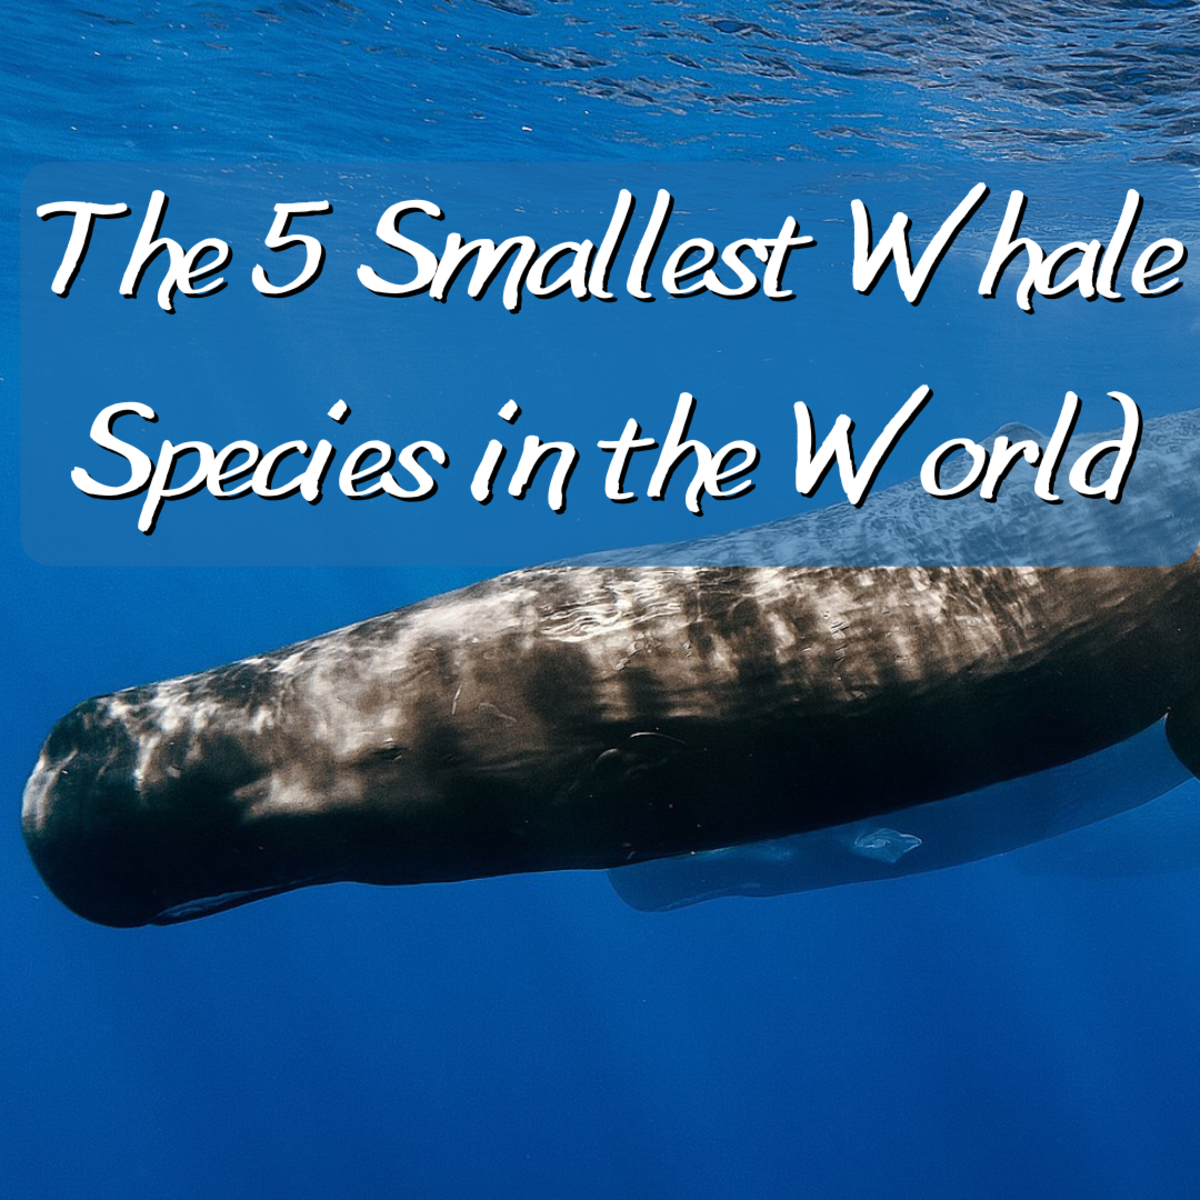 Top 5 Smallest Whale Species in the World